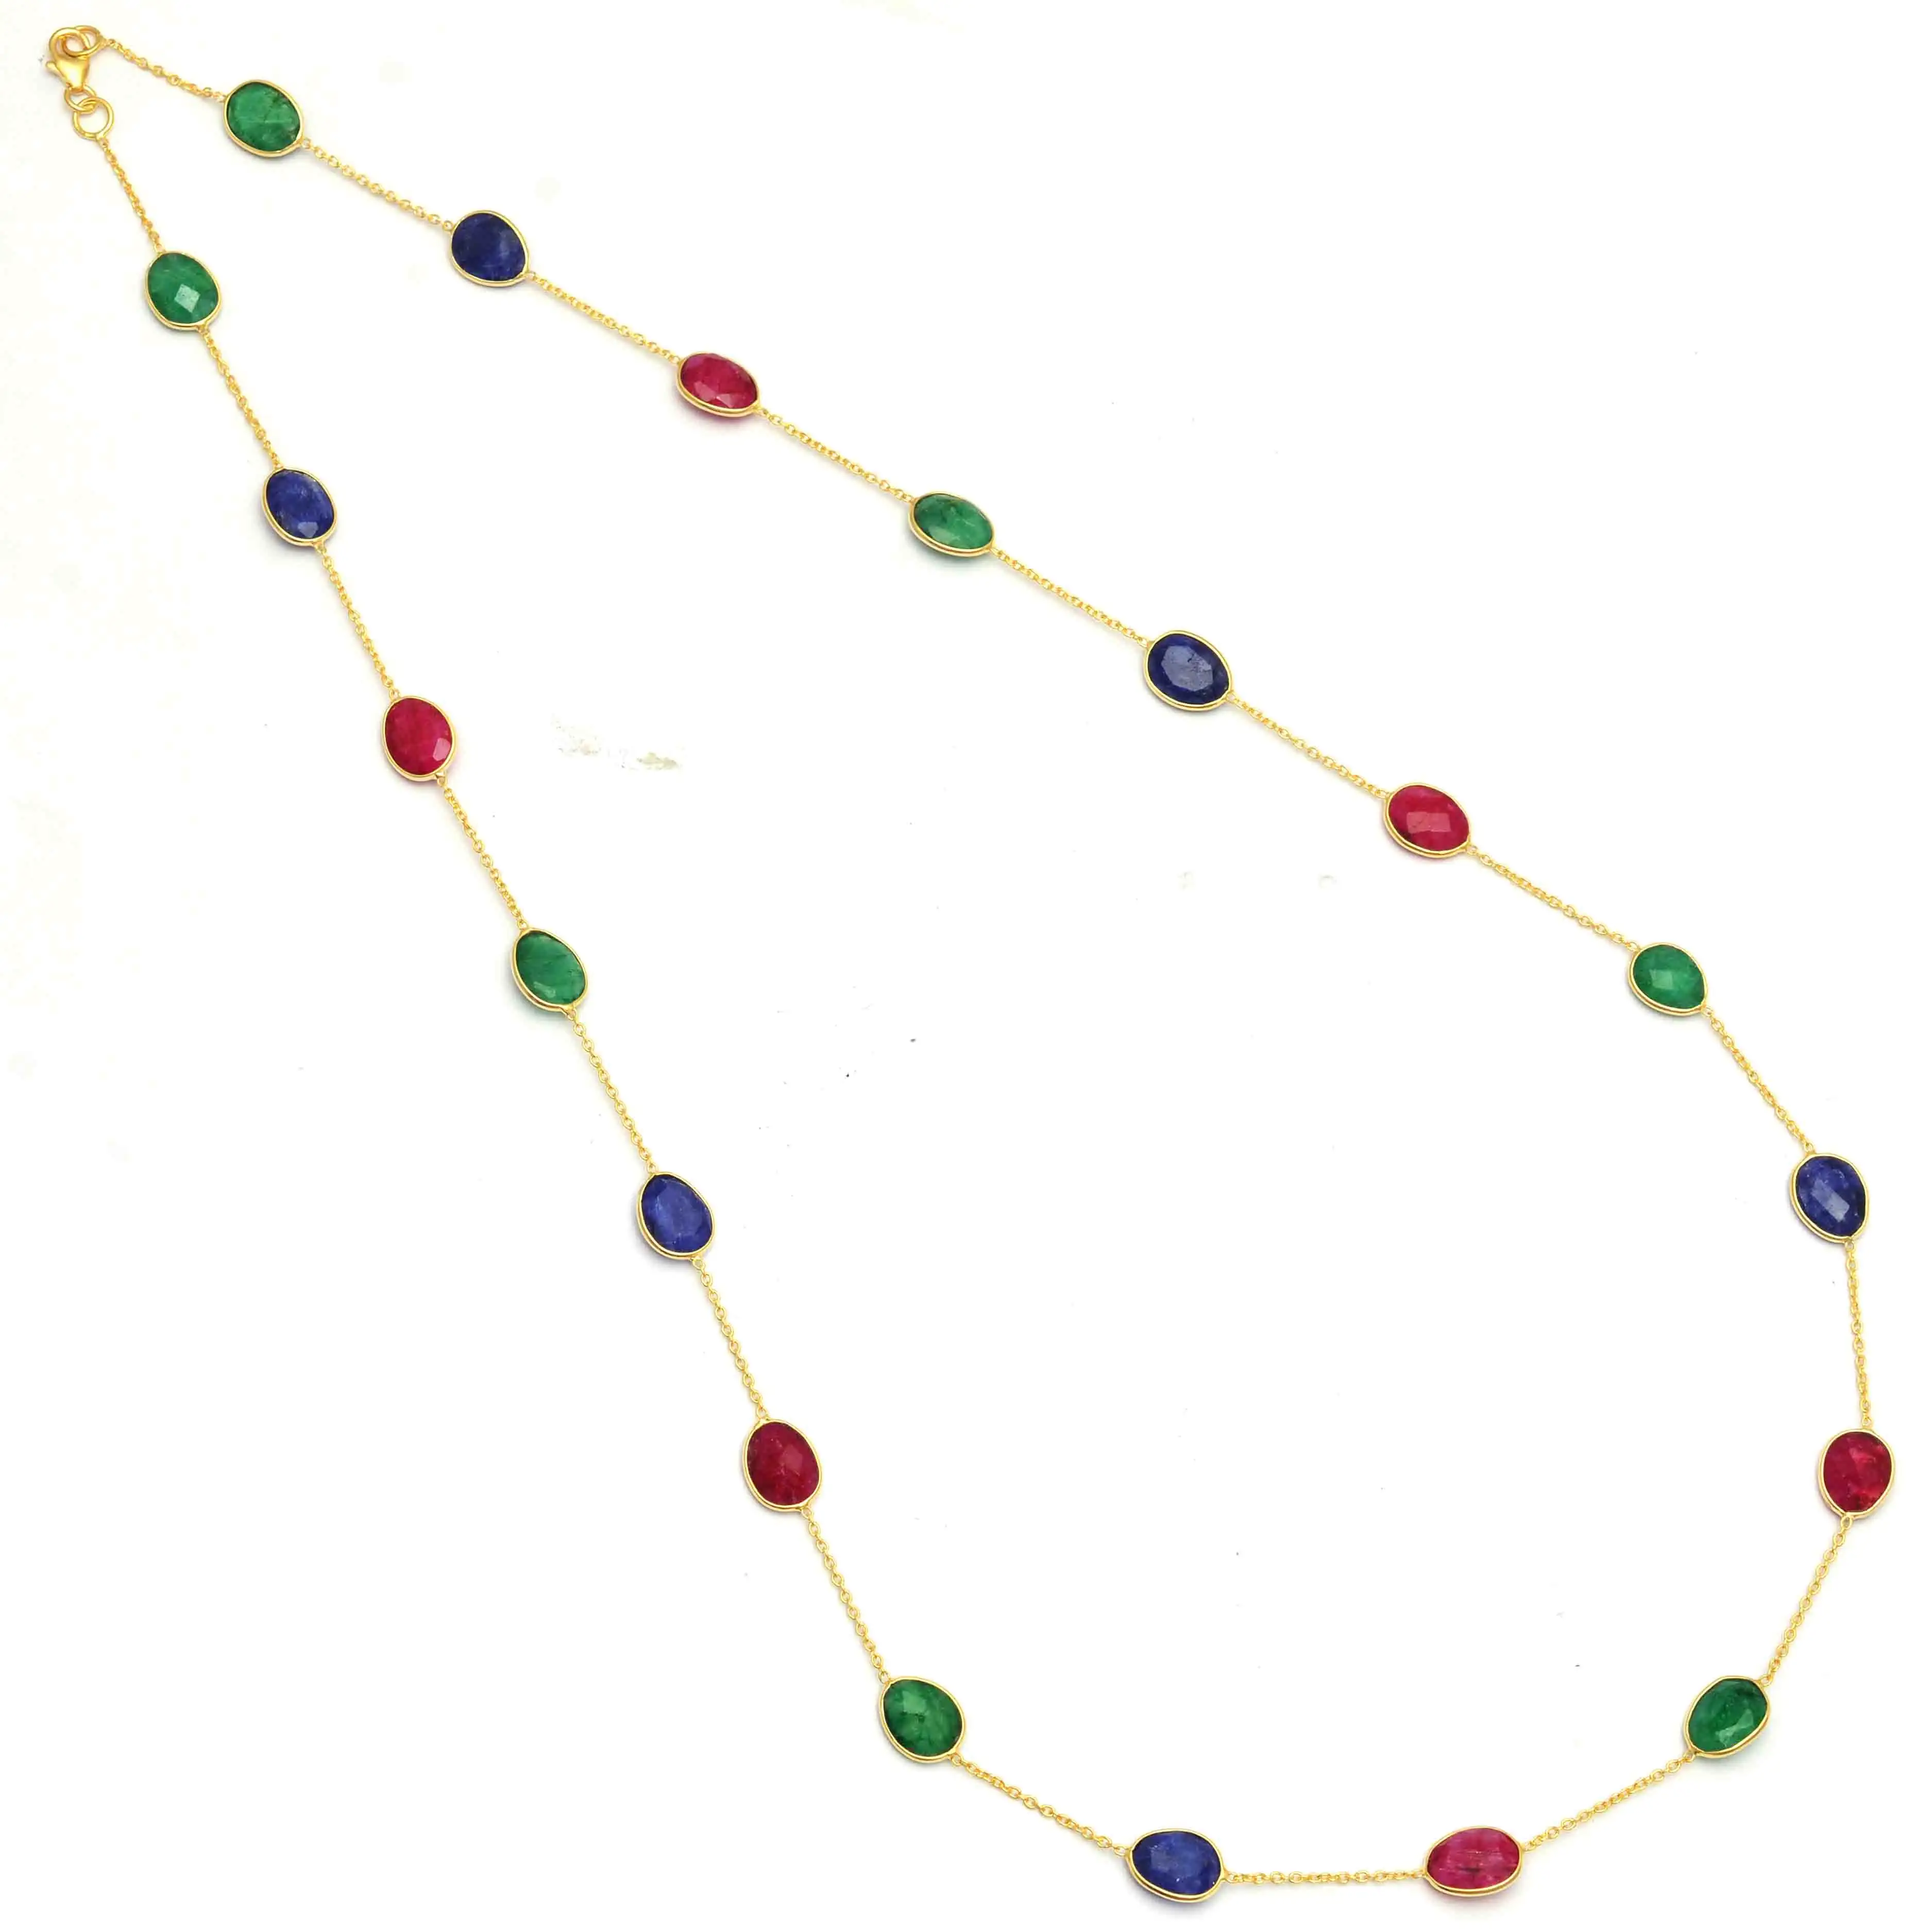 Emerald Ruby Sapphire Precious Necklace 18 Inches Long Chain Gold Plated Jewelry 925 Sterling Silver Solid Rope Chain Necklaces